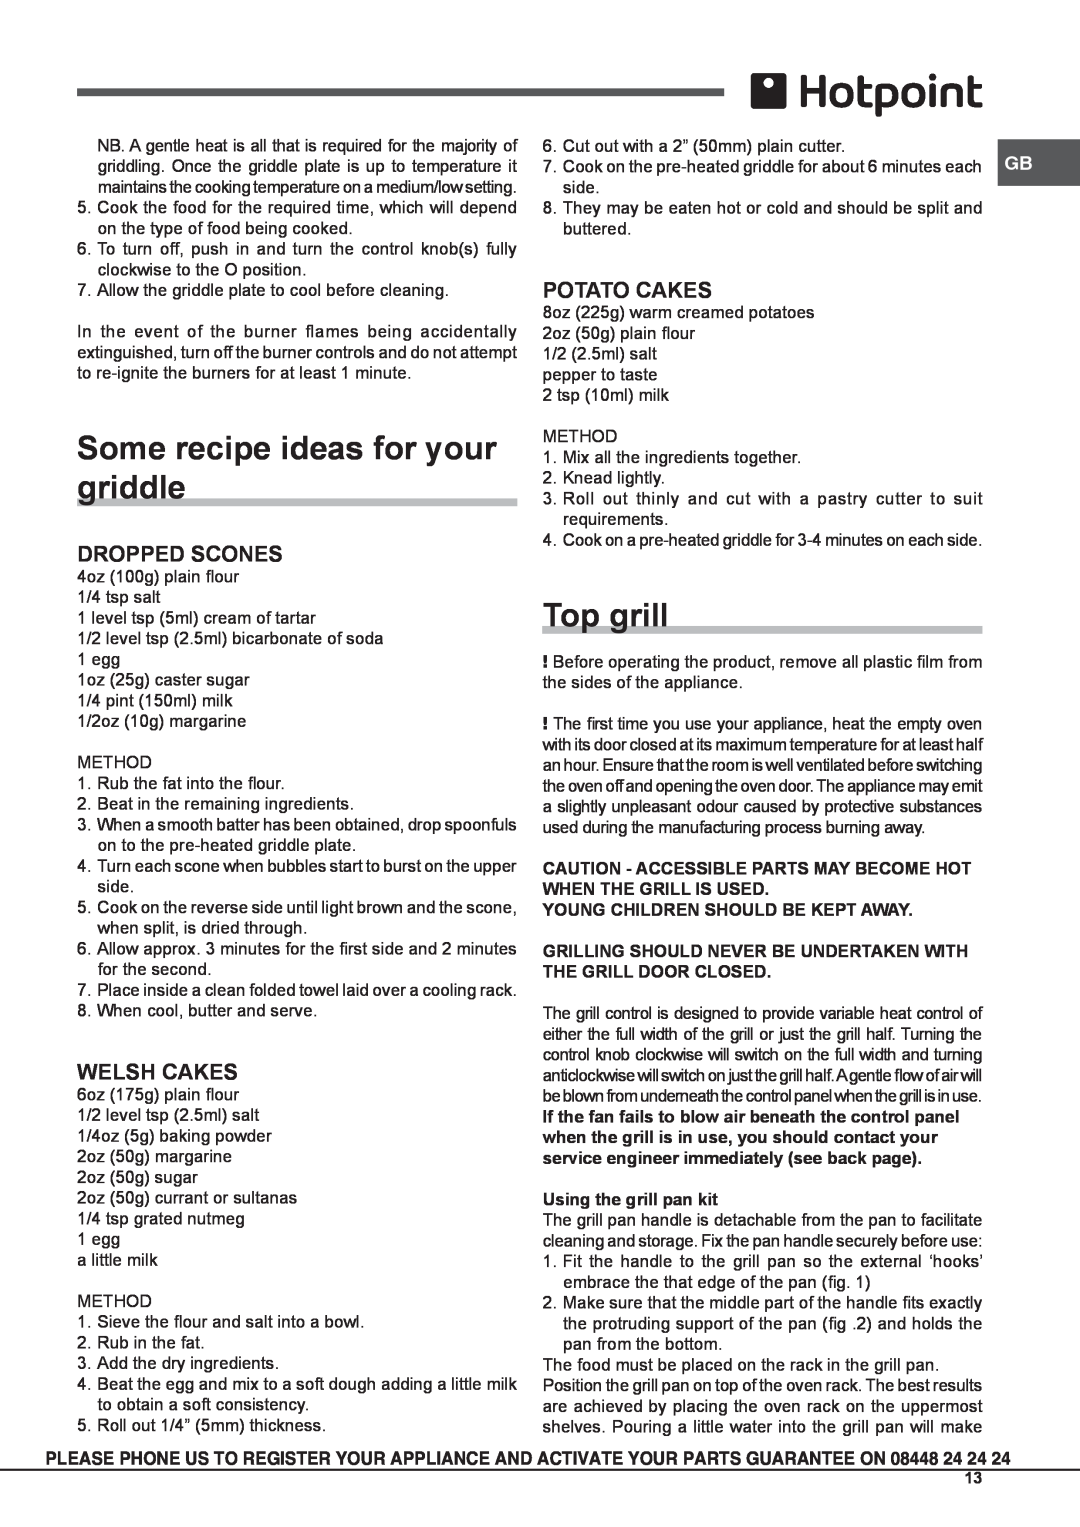 Hotpoint CG 40456 GF S manual Some recipe ideas for your griddle, Top grill, Dropped Scones, Welsh Cakes, Potato Cakes 